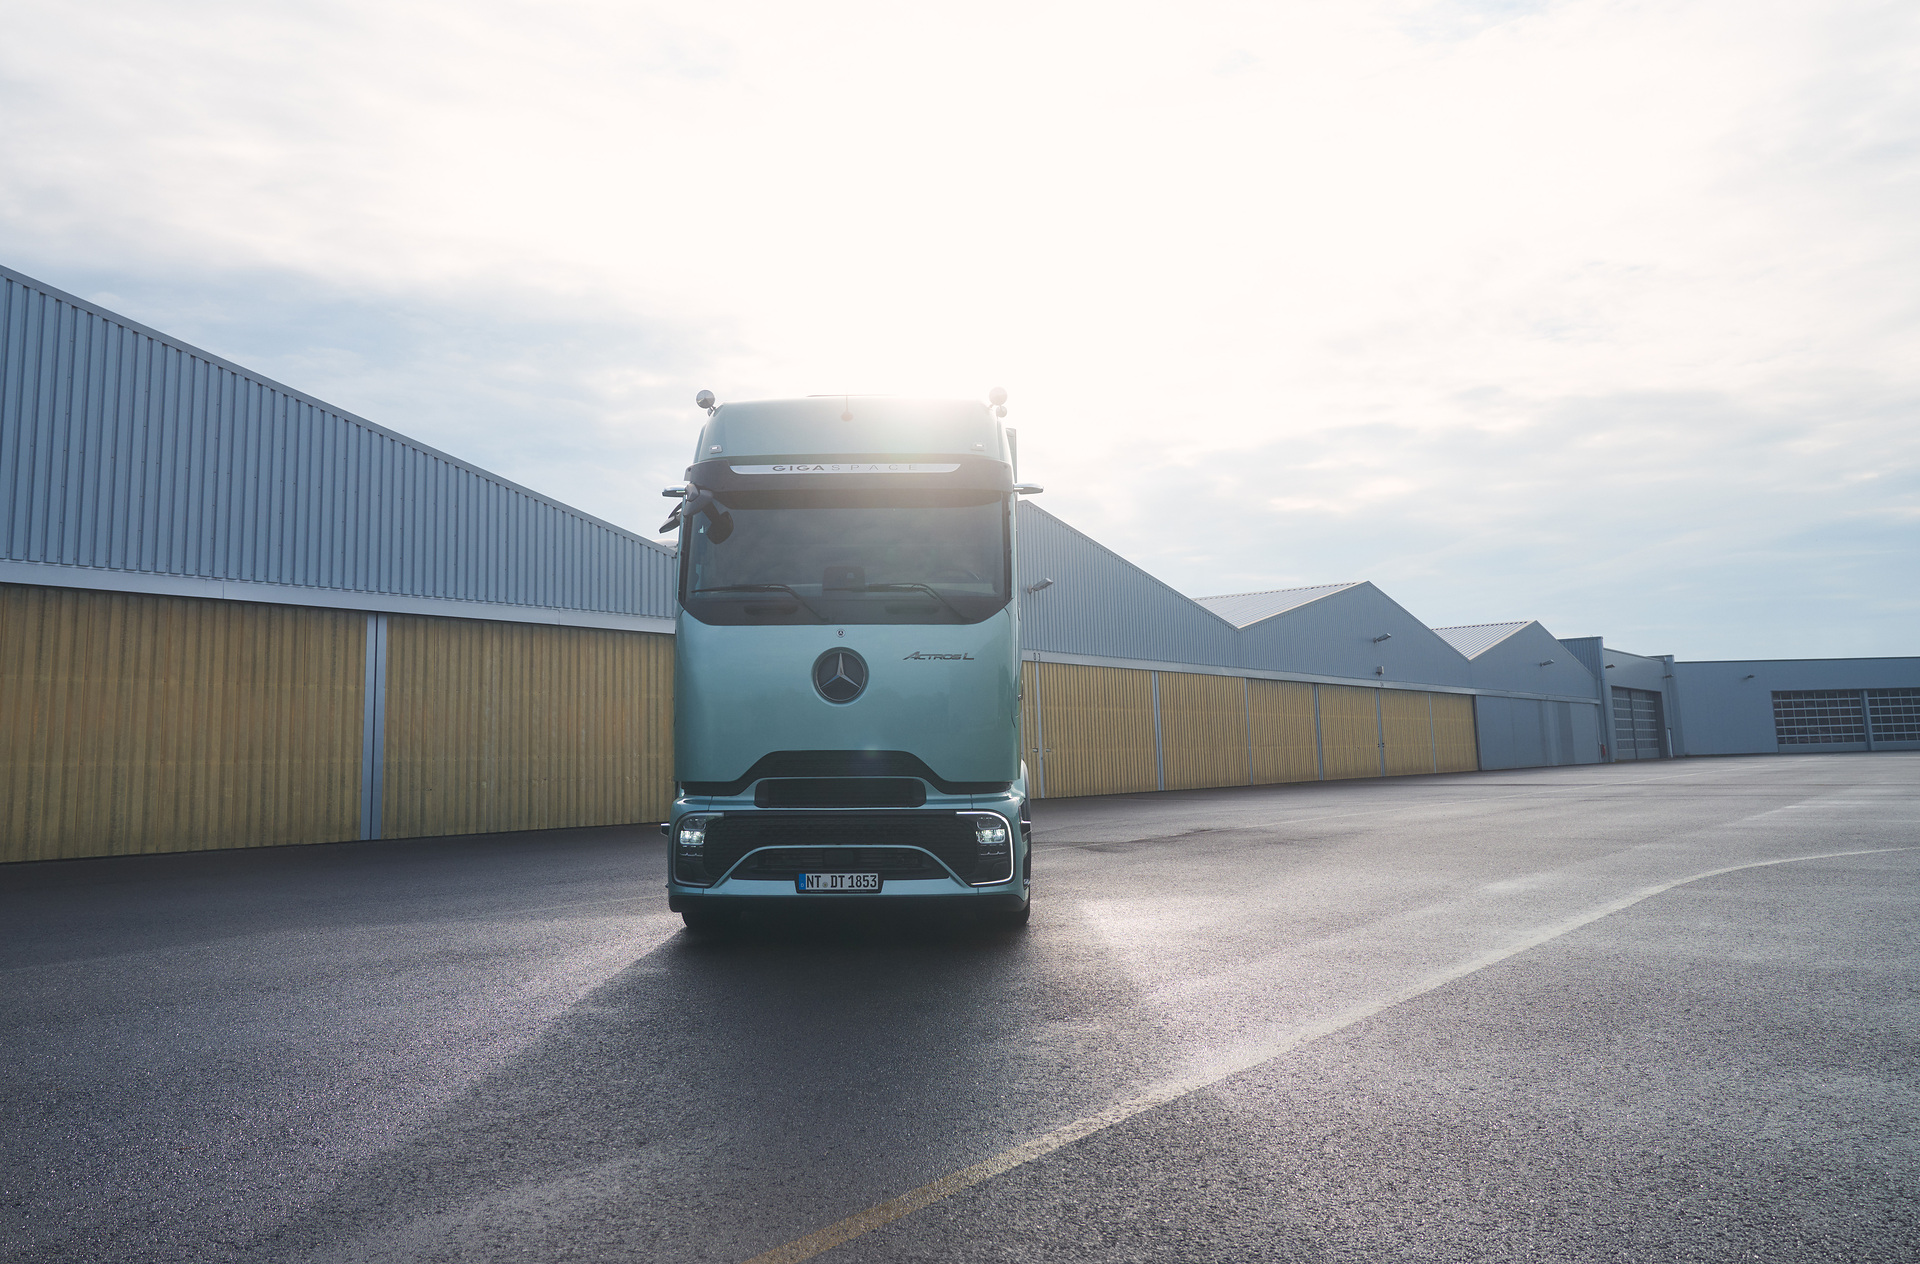 Even more efficiency on the road: The new Actros L from Mercedes-Benz Trucks with its futuristic ProCabin, even better aerodynamics and further optimized assistance systems